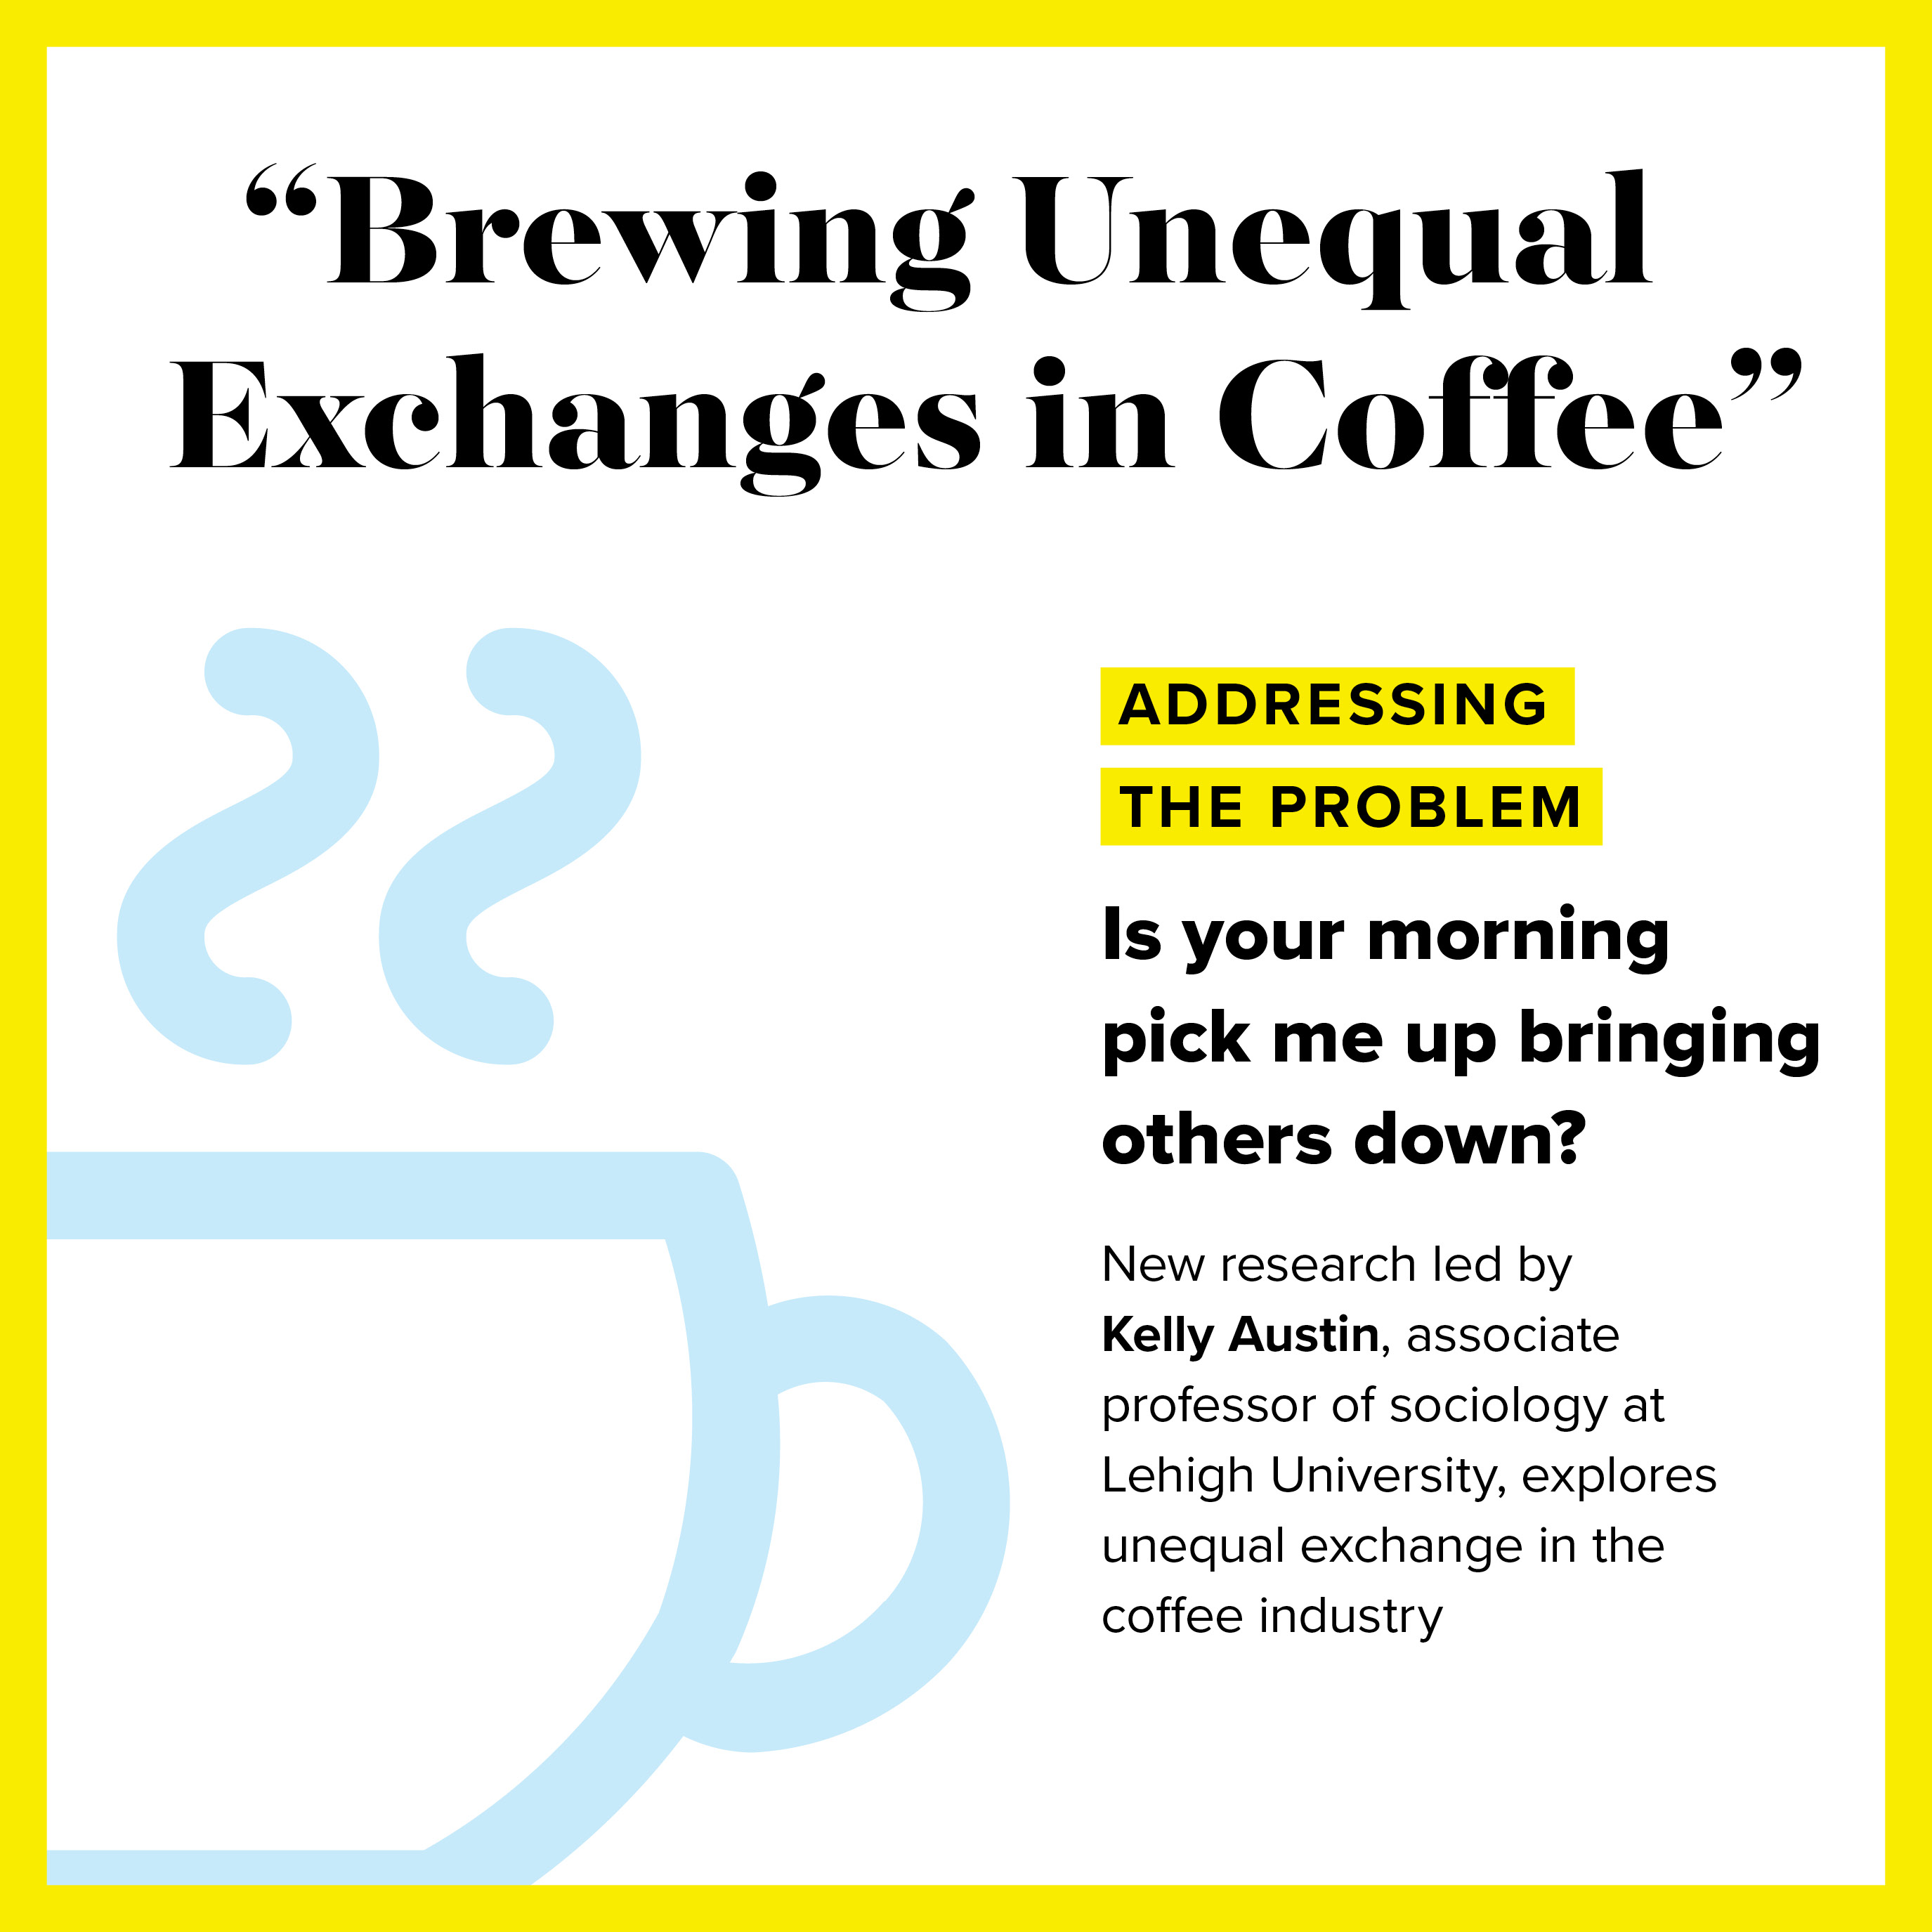 New research led by Kelly Austin, associate professor of sociology at Lehigh University, explores unequal exchange in the coffee industry